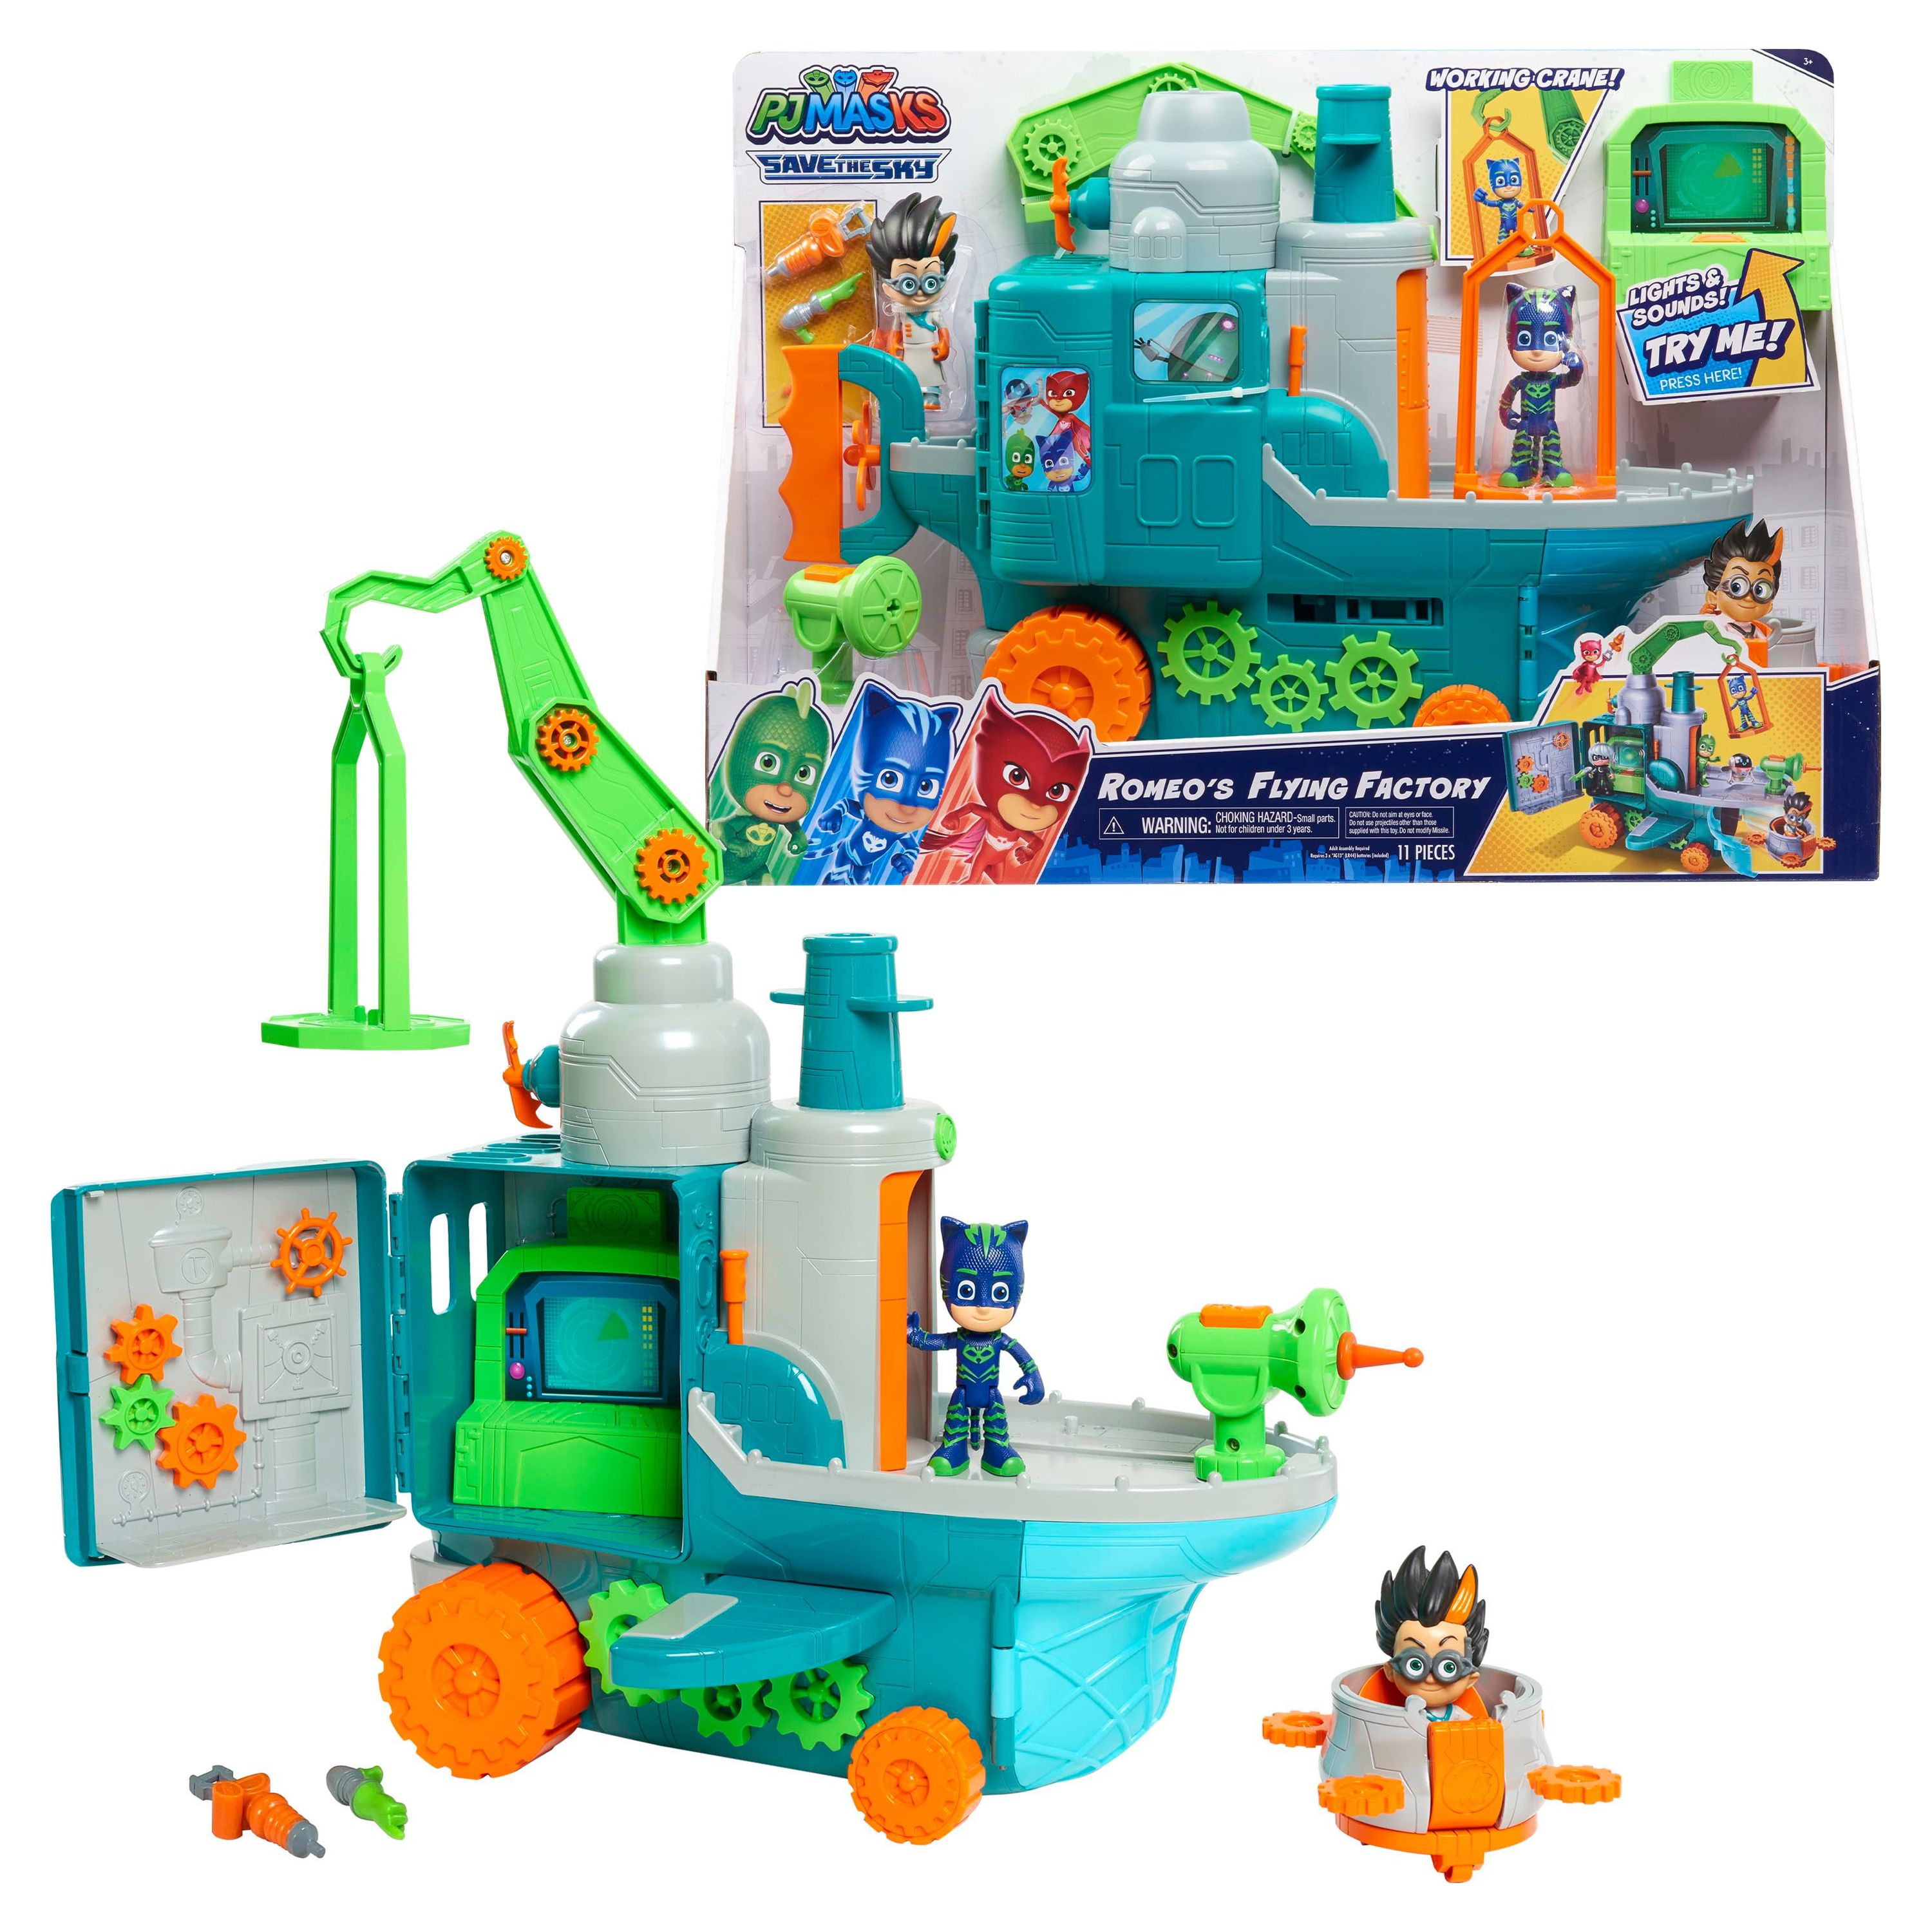 PJ Masks Romeo's Flying Factory Playset with Lights, Sounds, and Secret Compartment,  Kids Toys for Ages 3 Up, Gifts and Presents - image 1 of 7